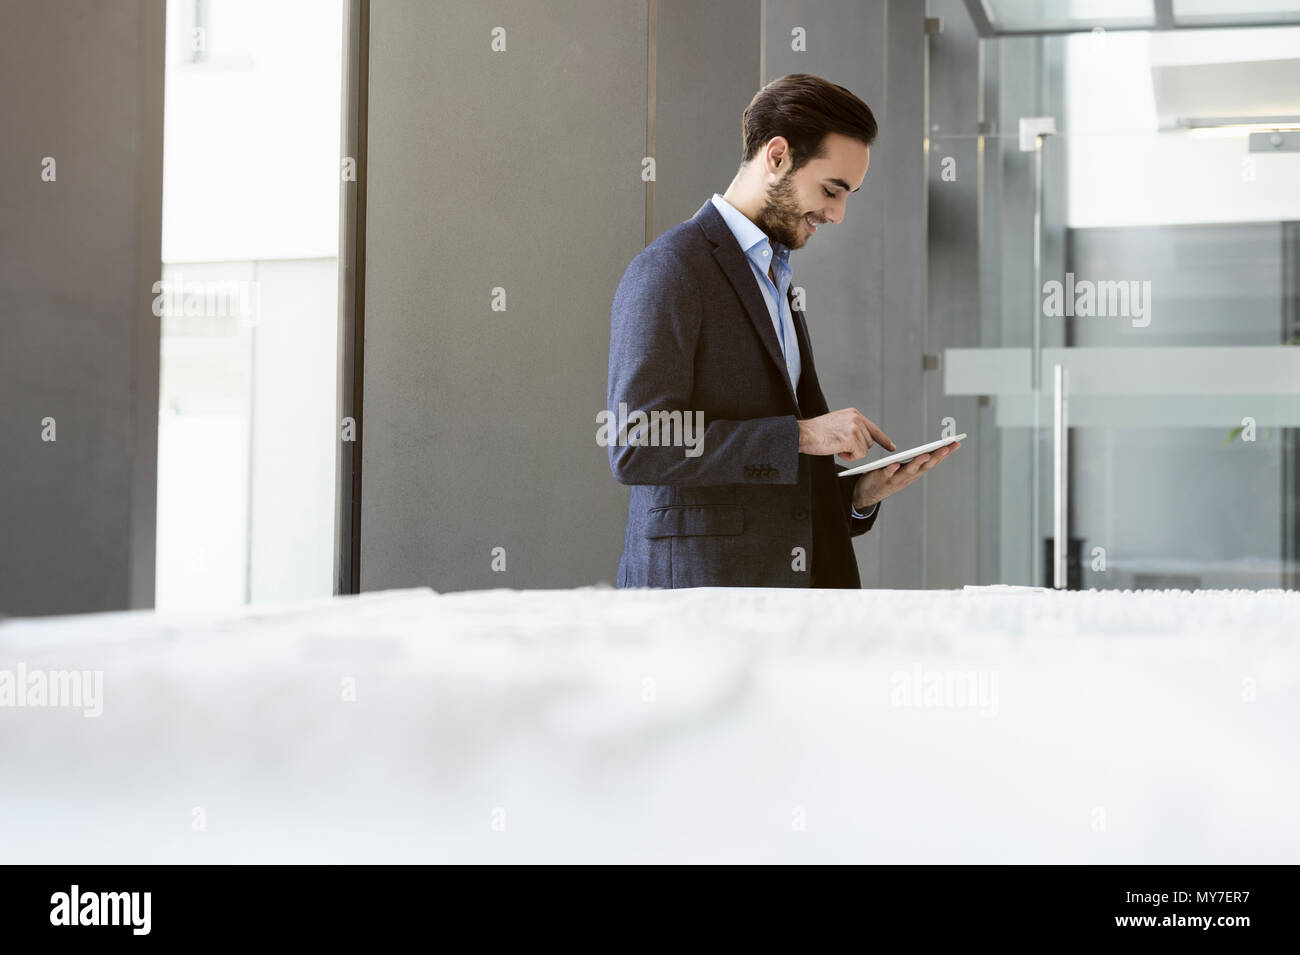 Businessman in office using digital tablet Stock Photo